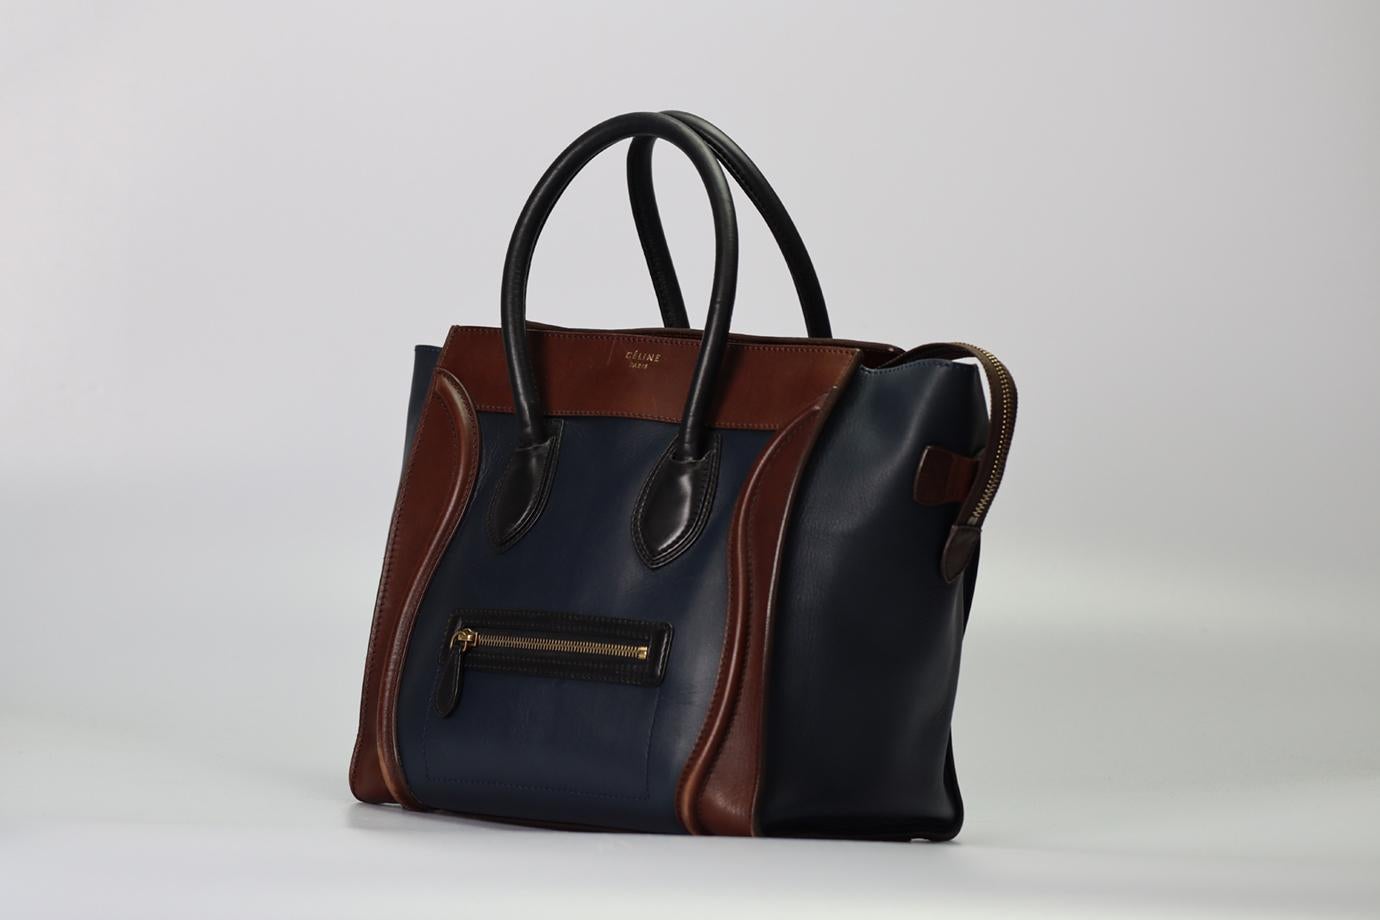 Women's Celine Luggage Mini Leather Tote Bag For Sale